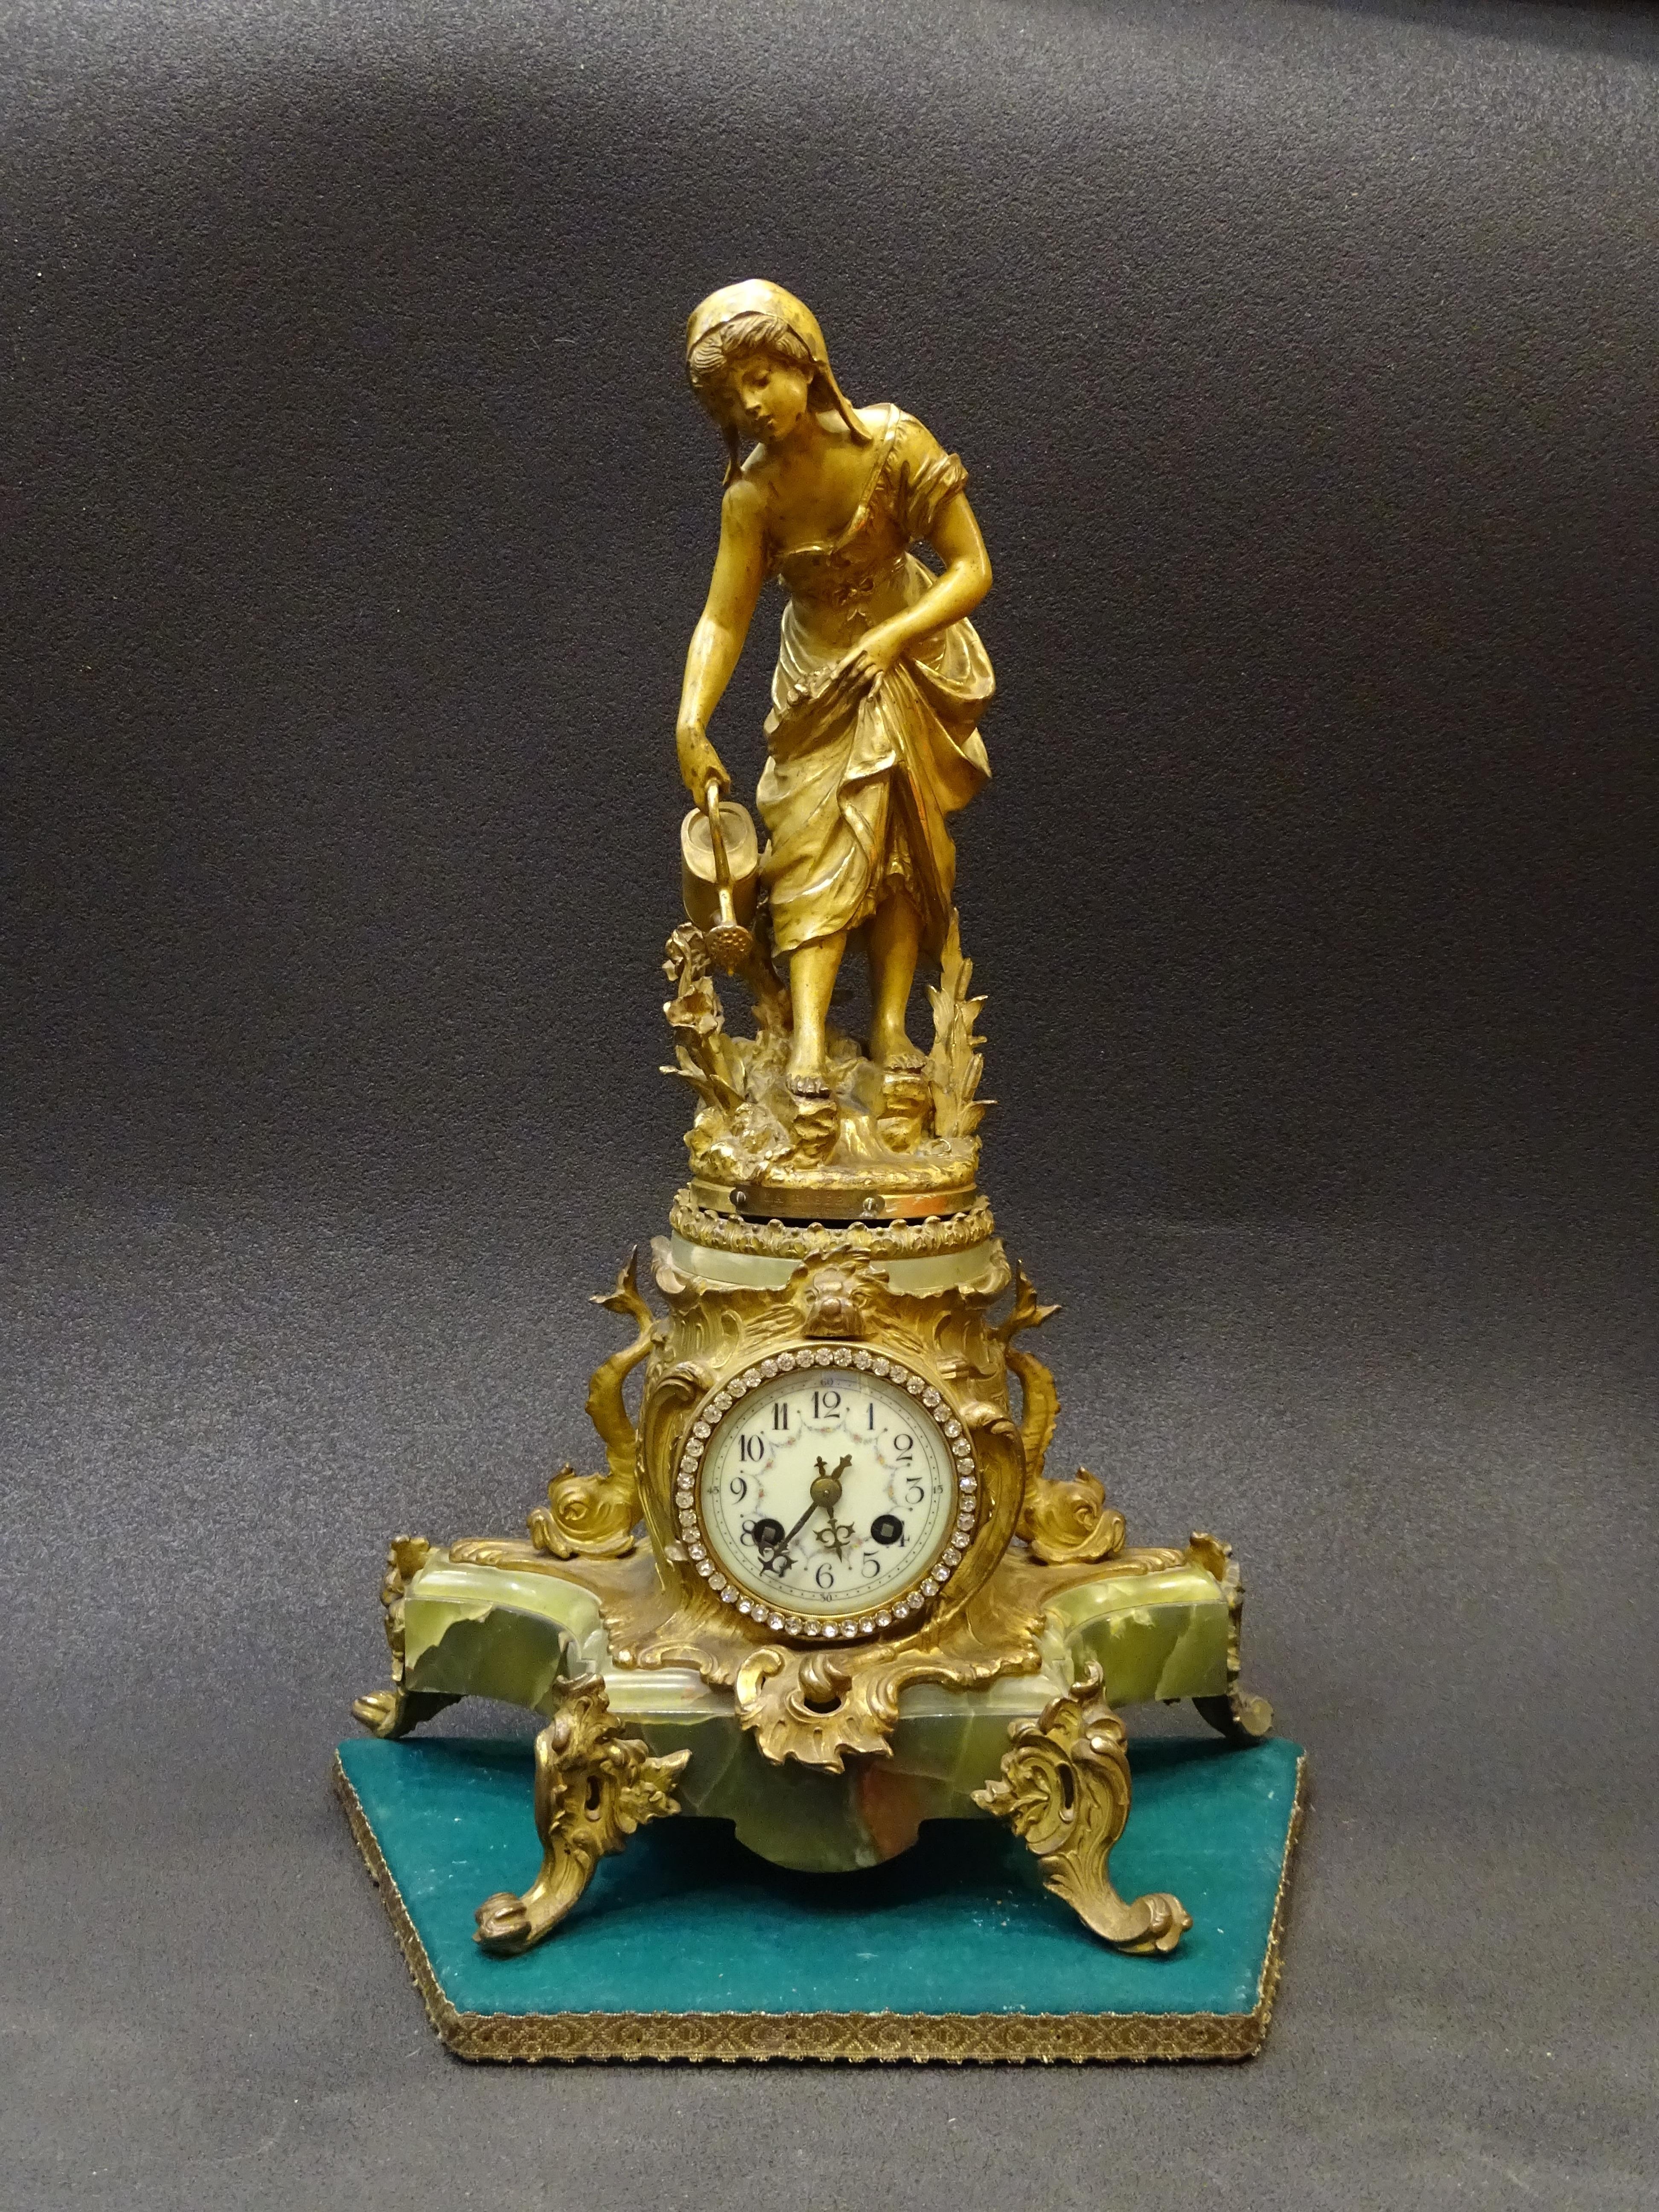 French 19thcenturyfrench Mantelclock Sculpture Moureau, Bronce and Marble